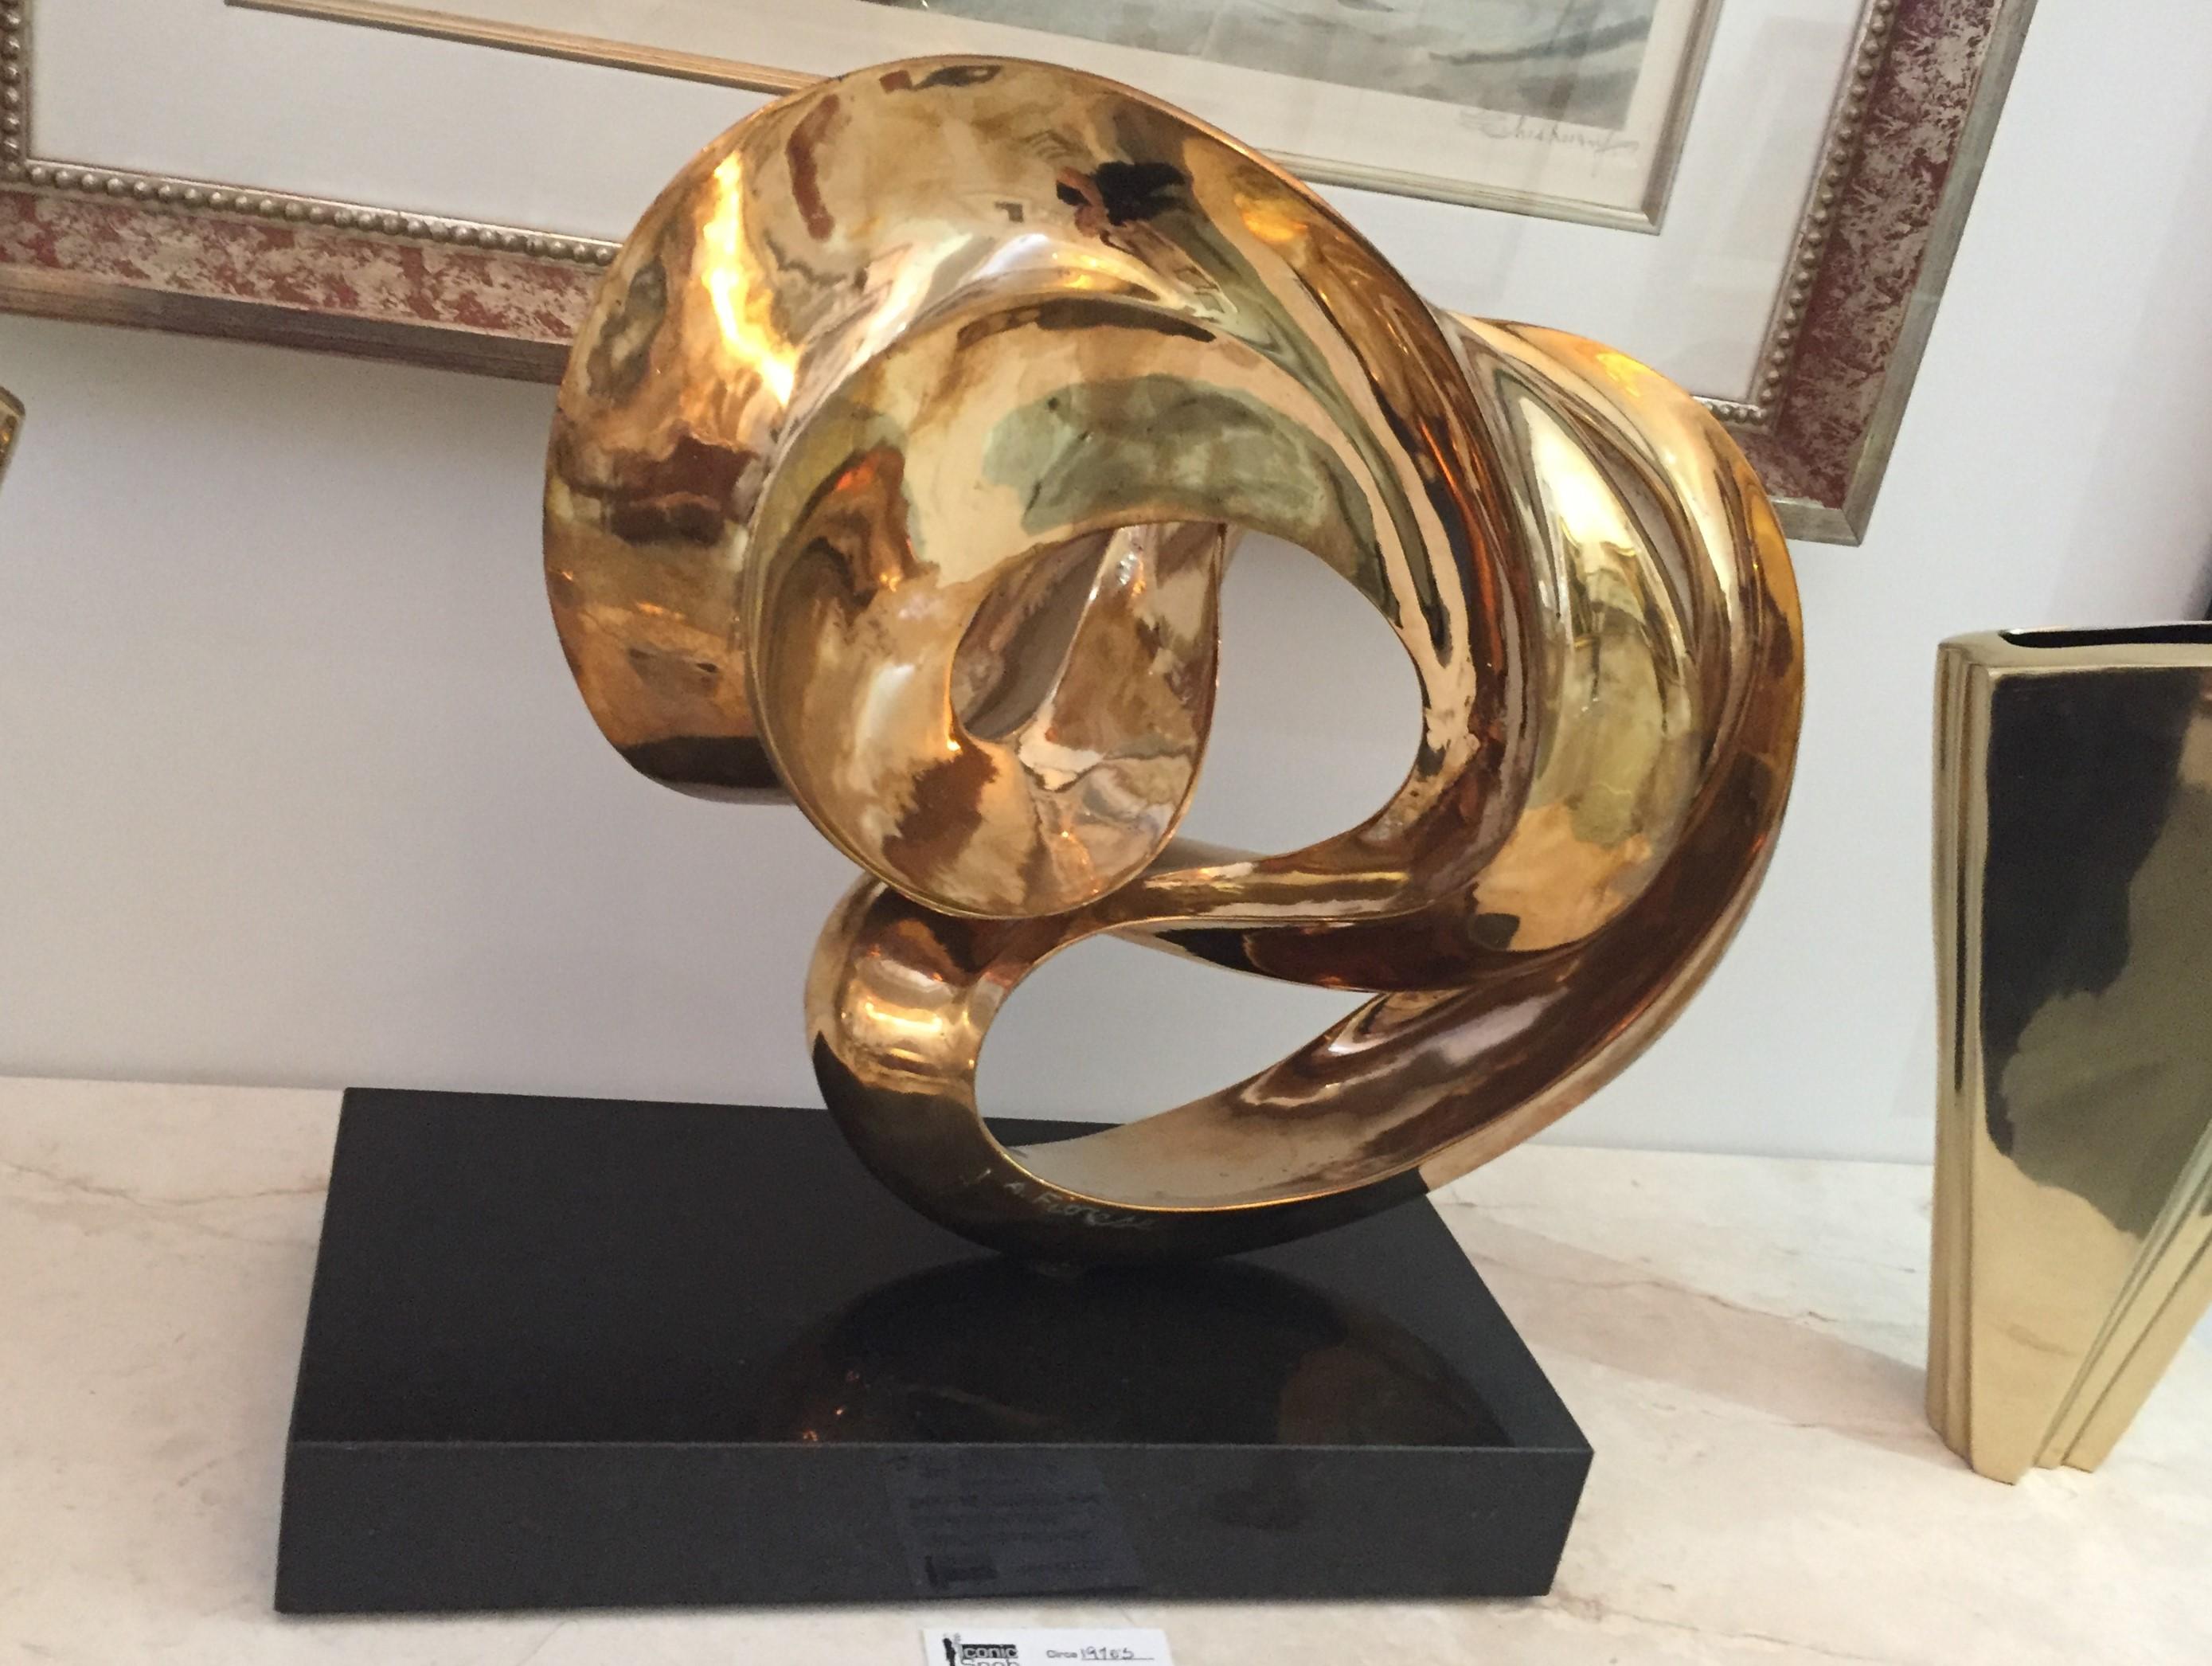 Swirl sculpture gold wash over bronze by Amedeo Fiorese. This sculpture can rotate on its base. Signed by the artist.

Note: base measures 2.5 x 15.75 x 7.88.